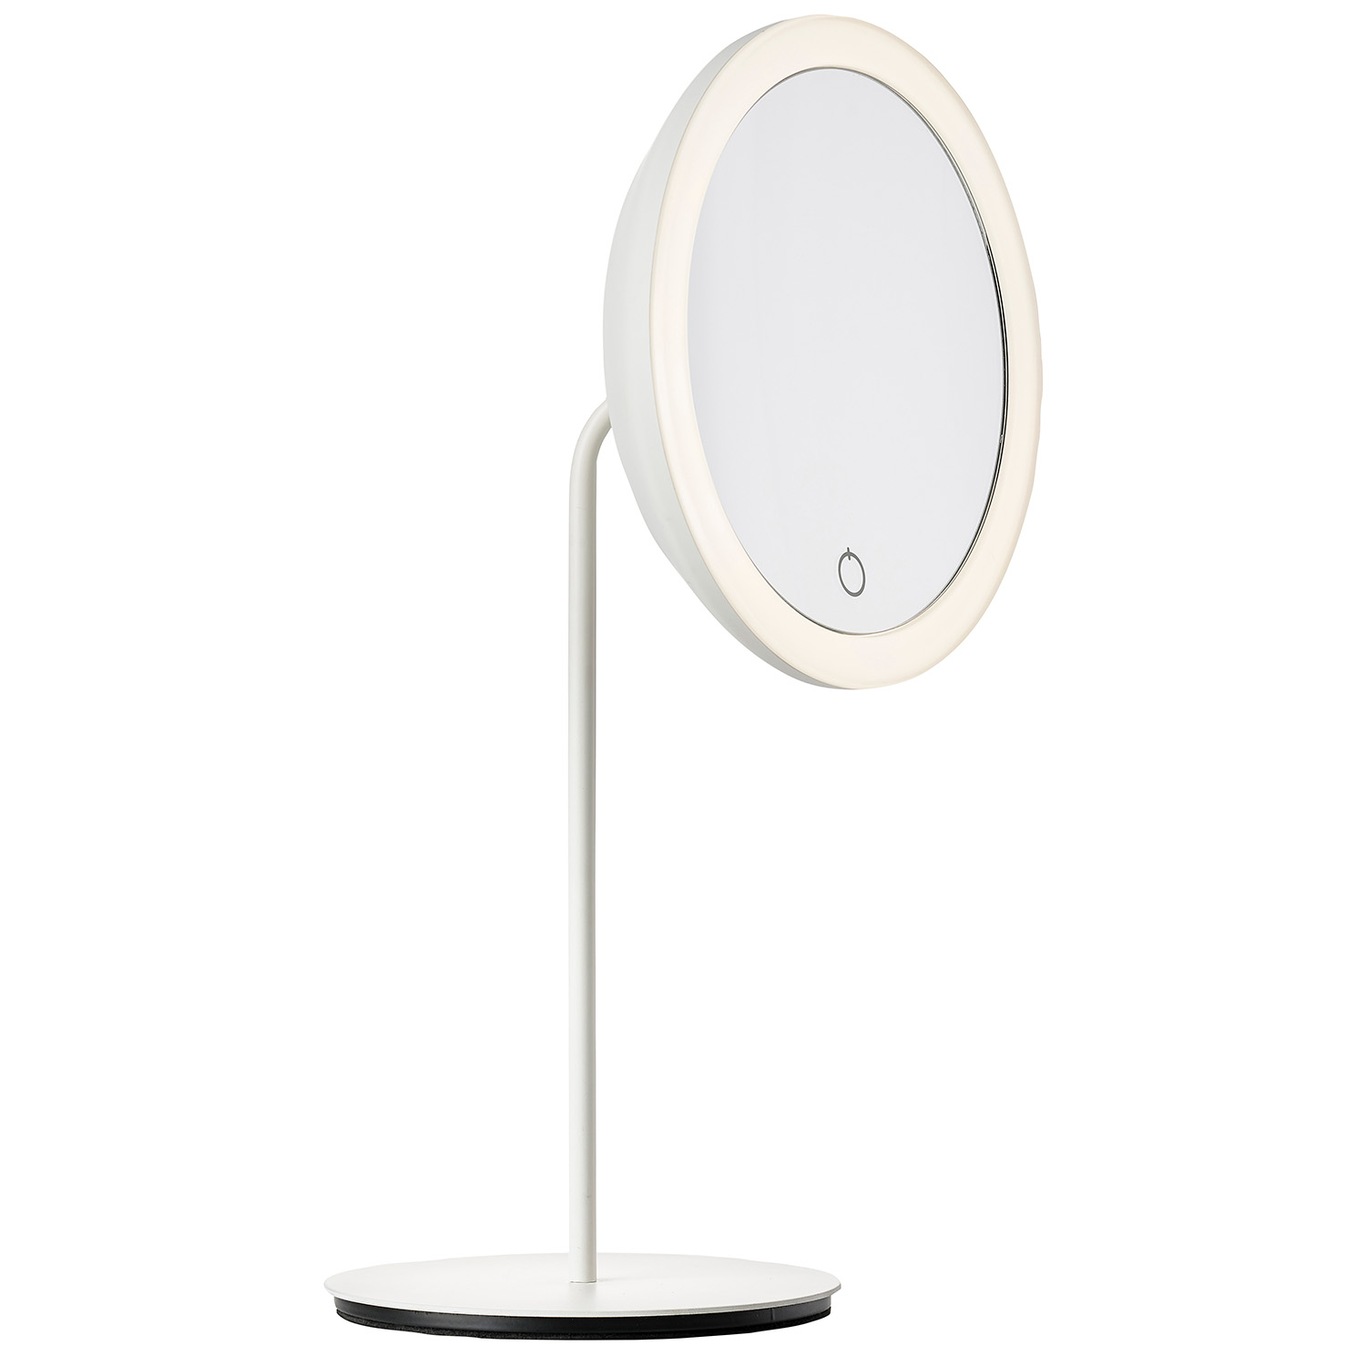 Table Mirror With Light, 5x Zoom, White